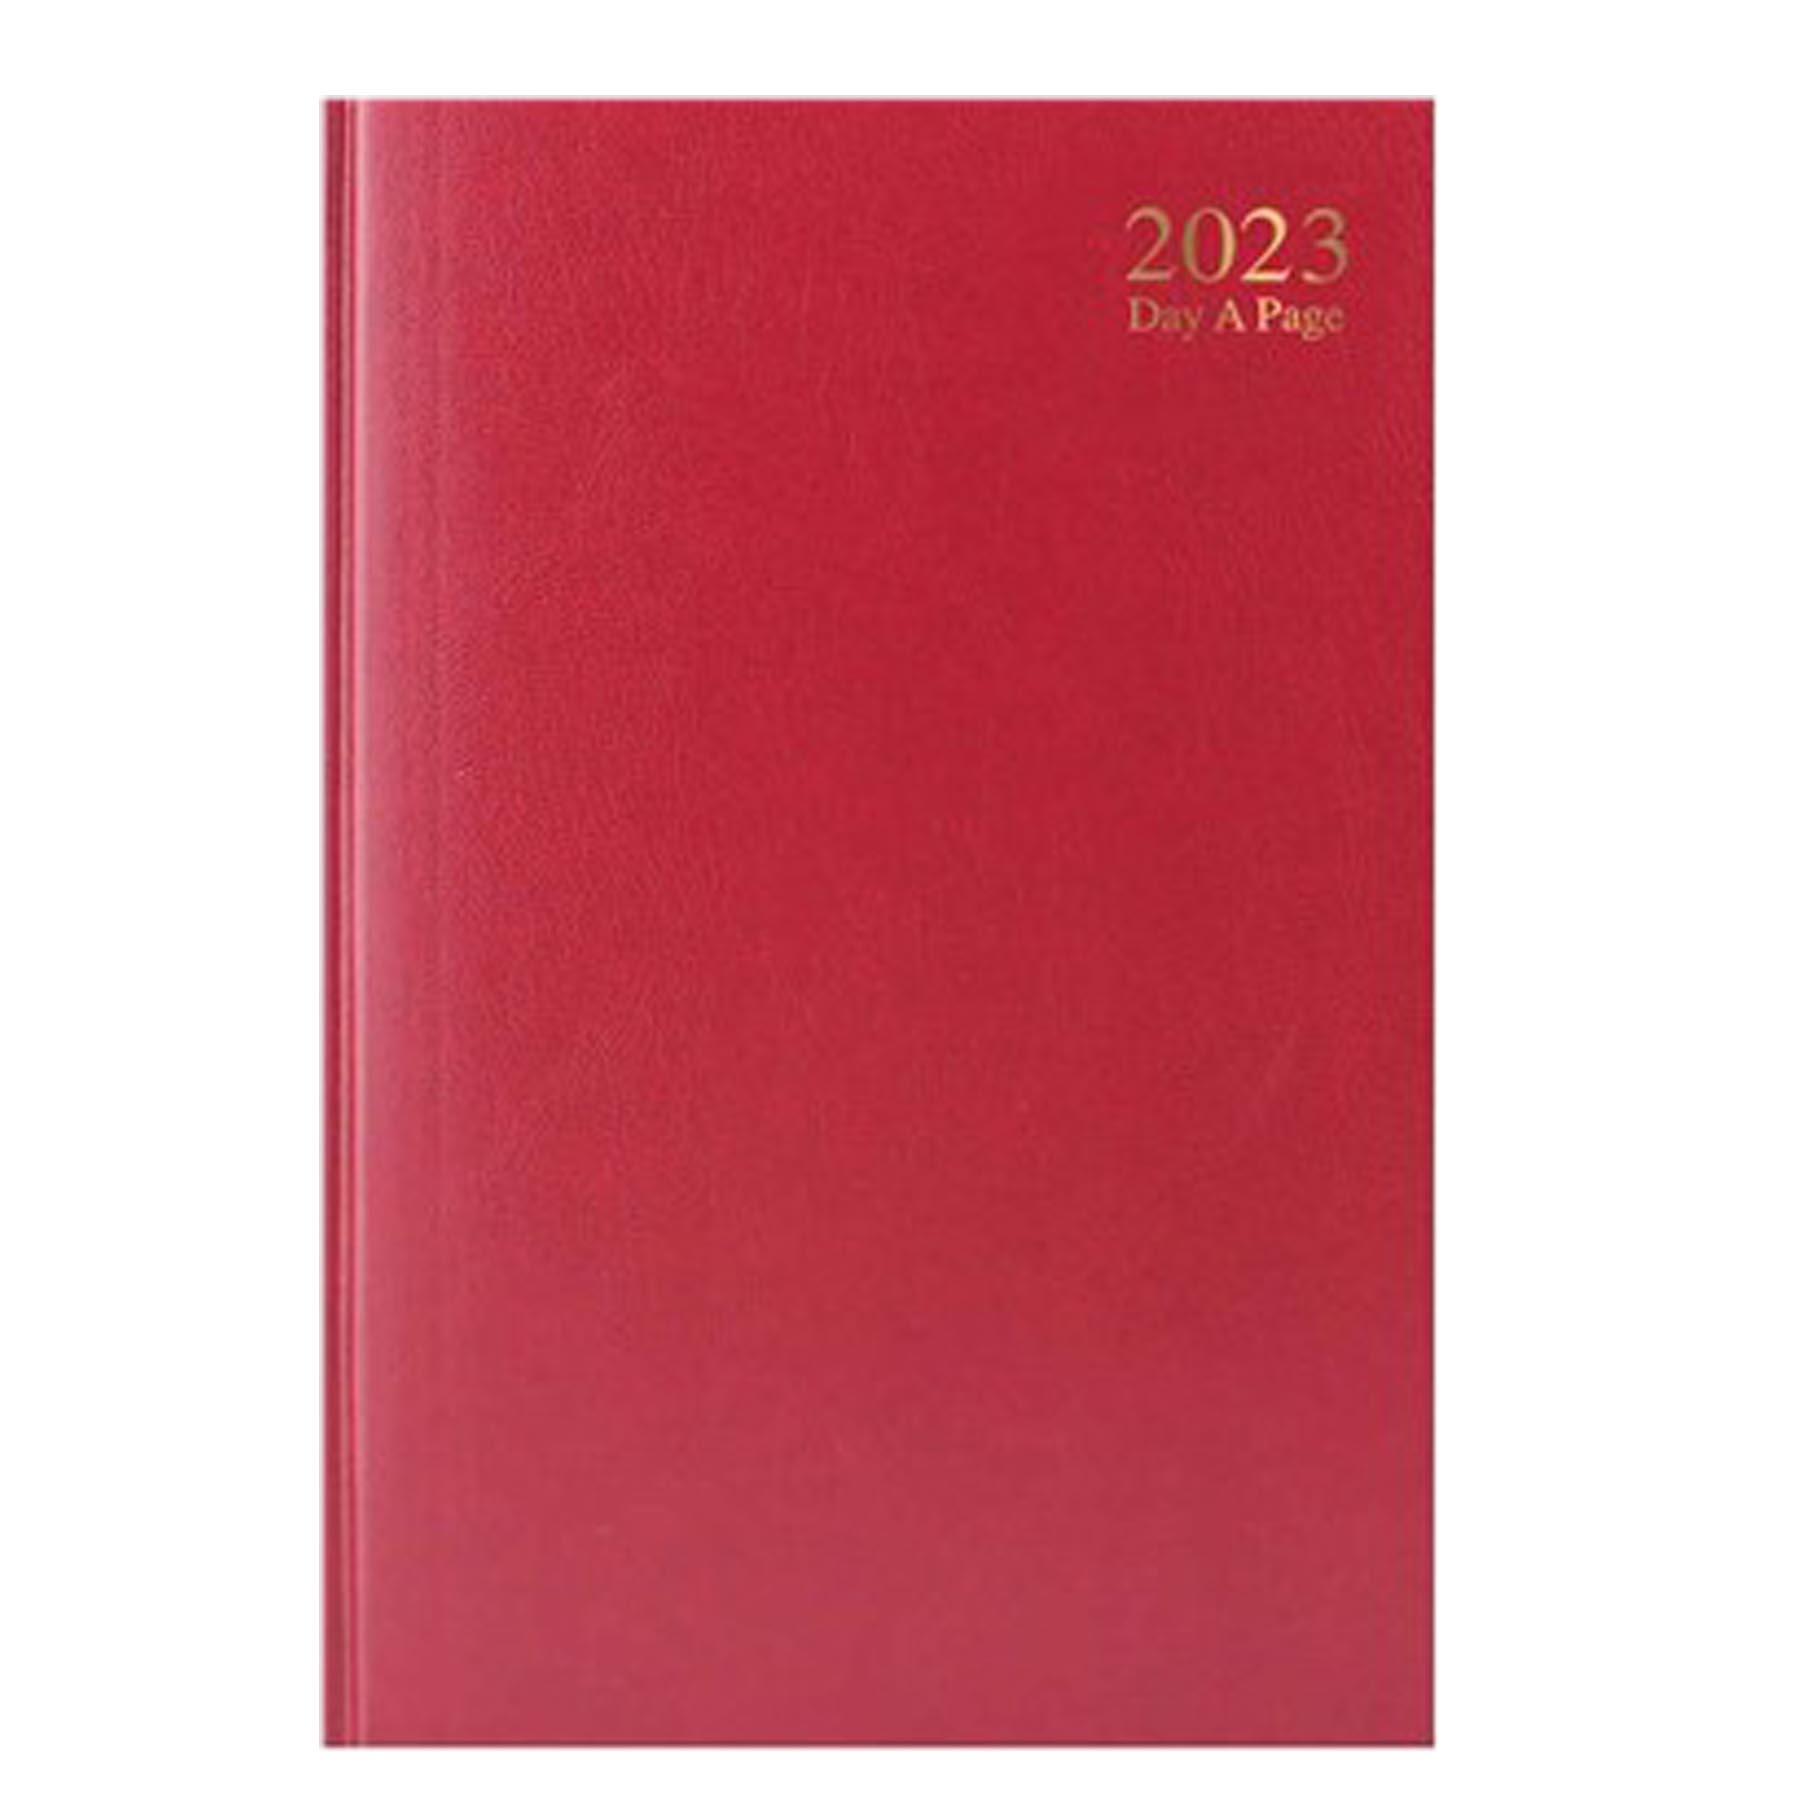 2023 A4 Hardback Day a Page Diary 3188 - Red